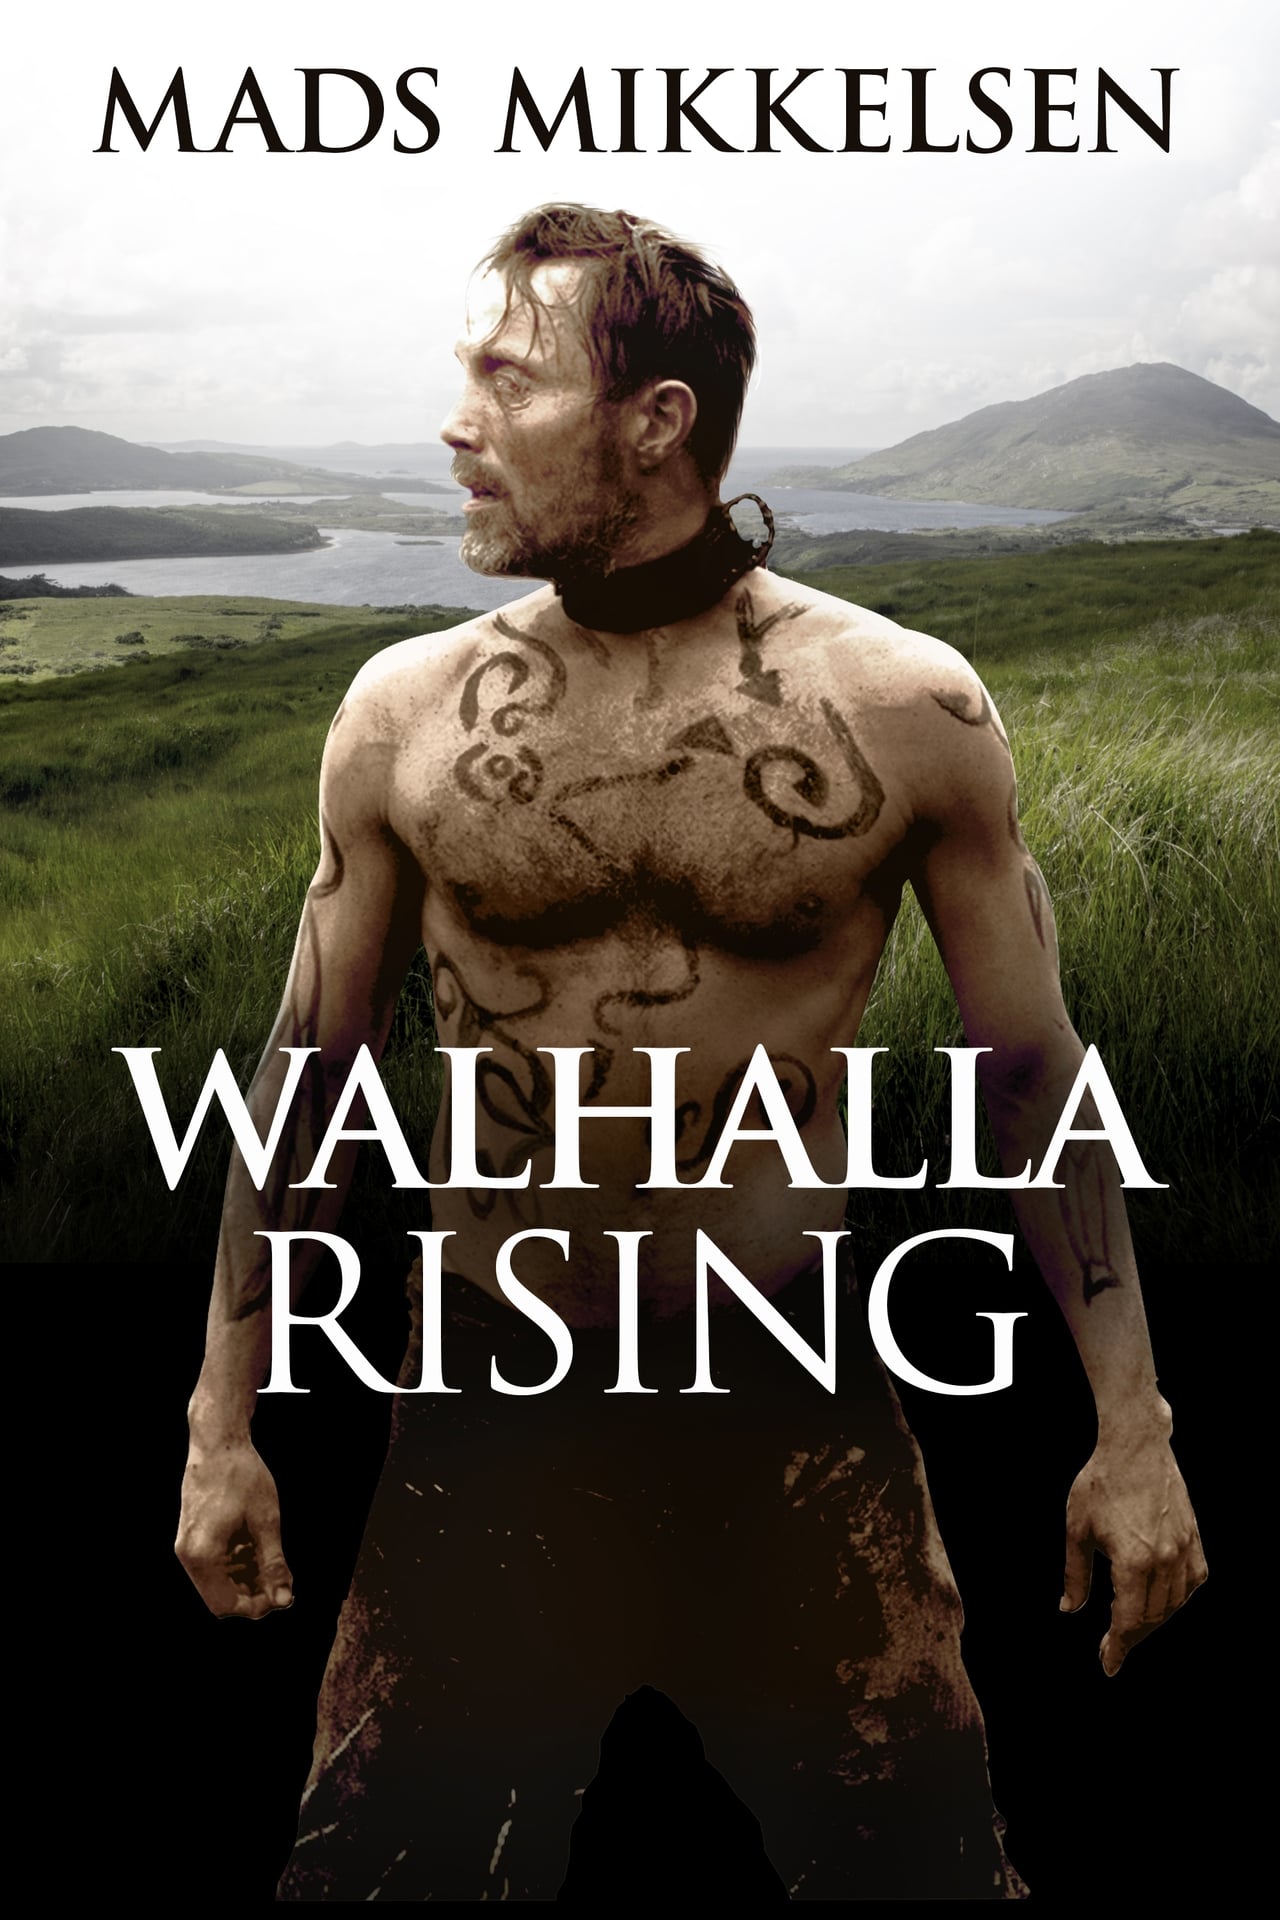 valhalla-rising-wiki-synopsis-reviews-watch-and-download